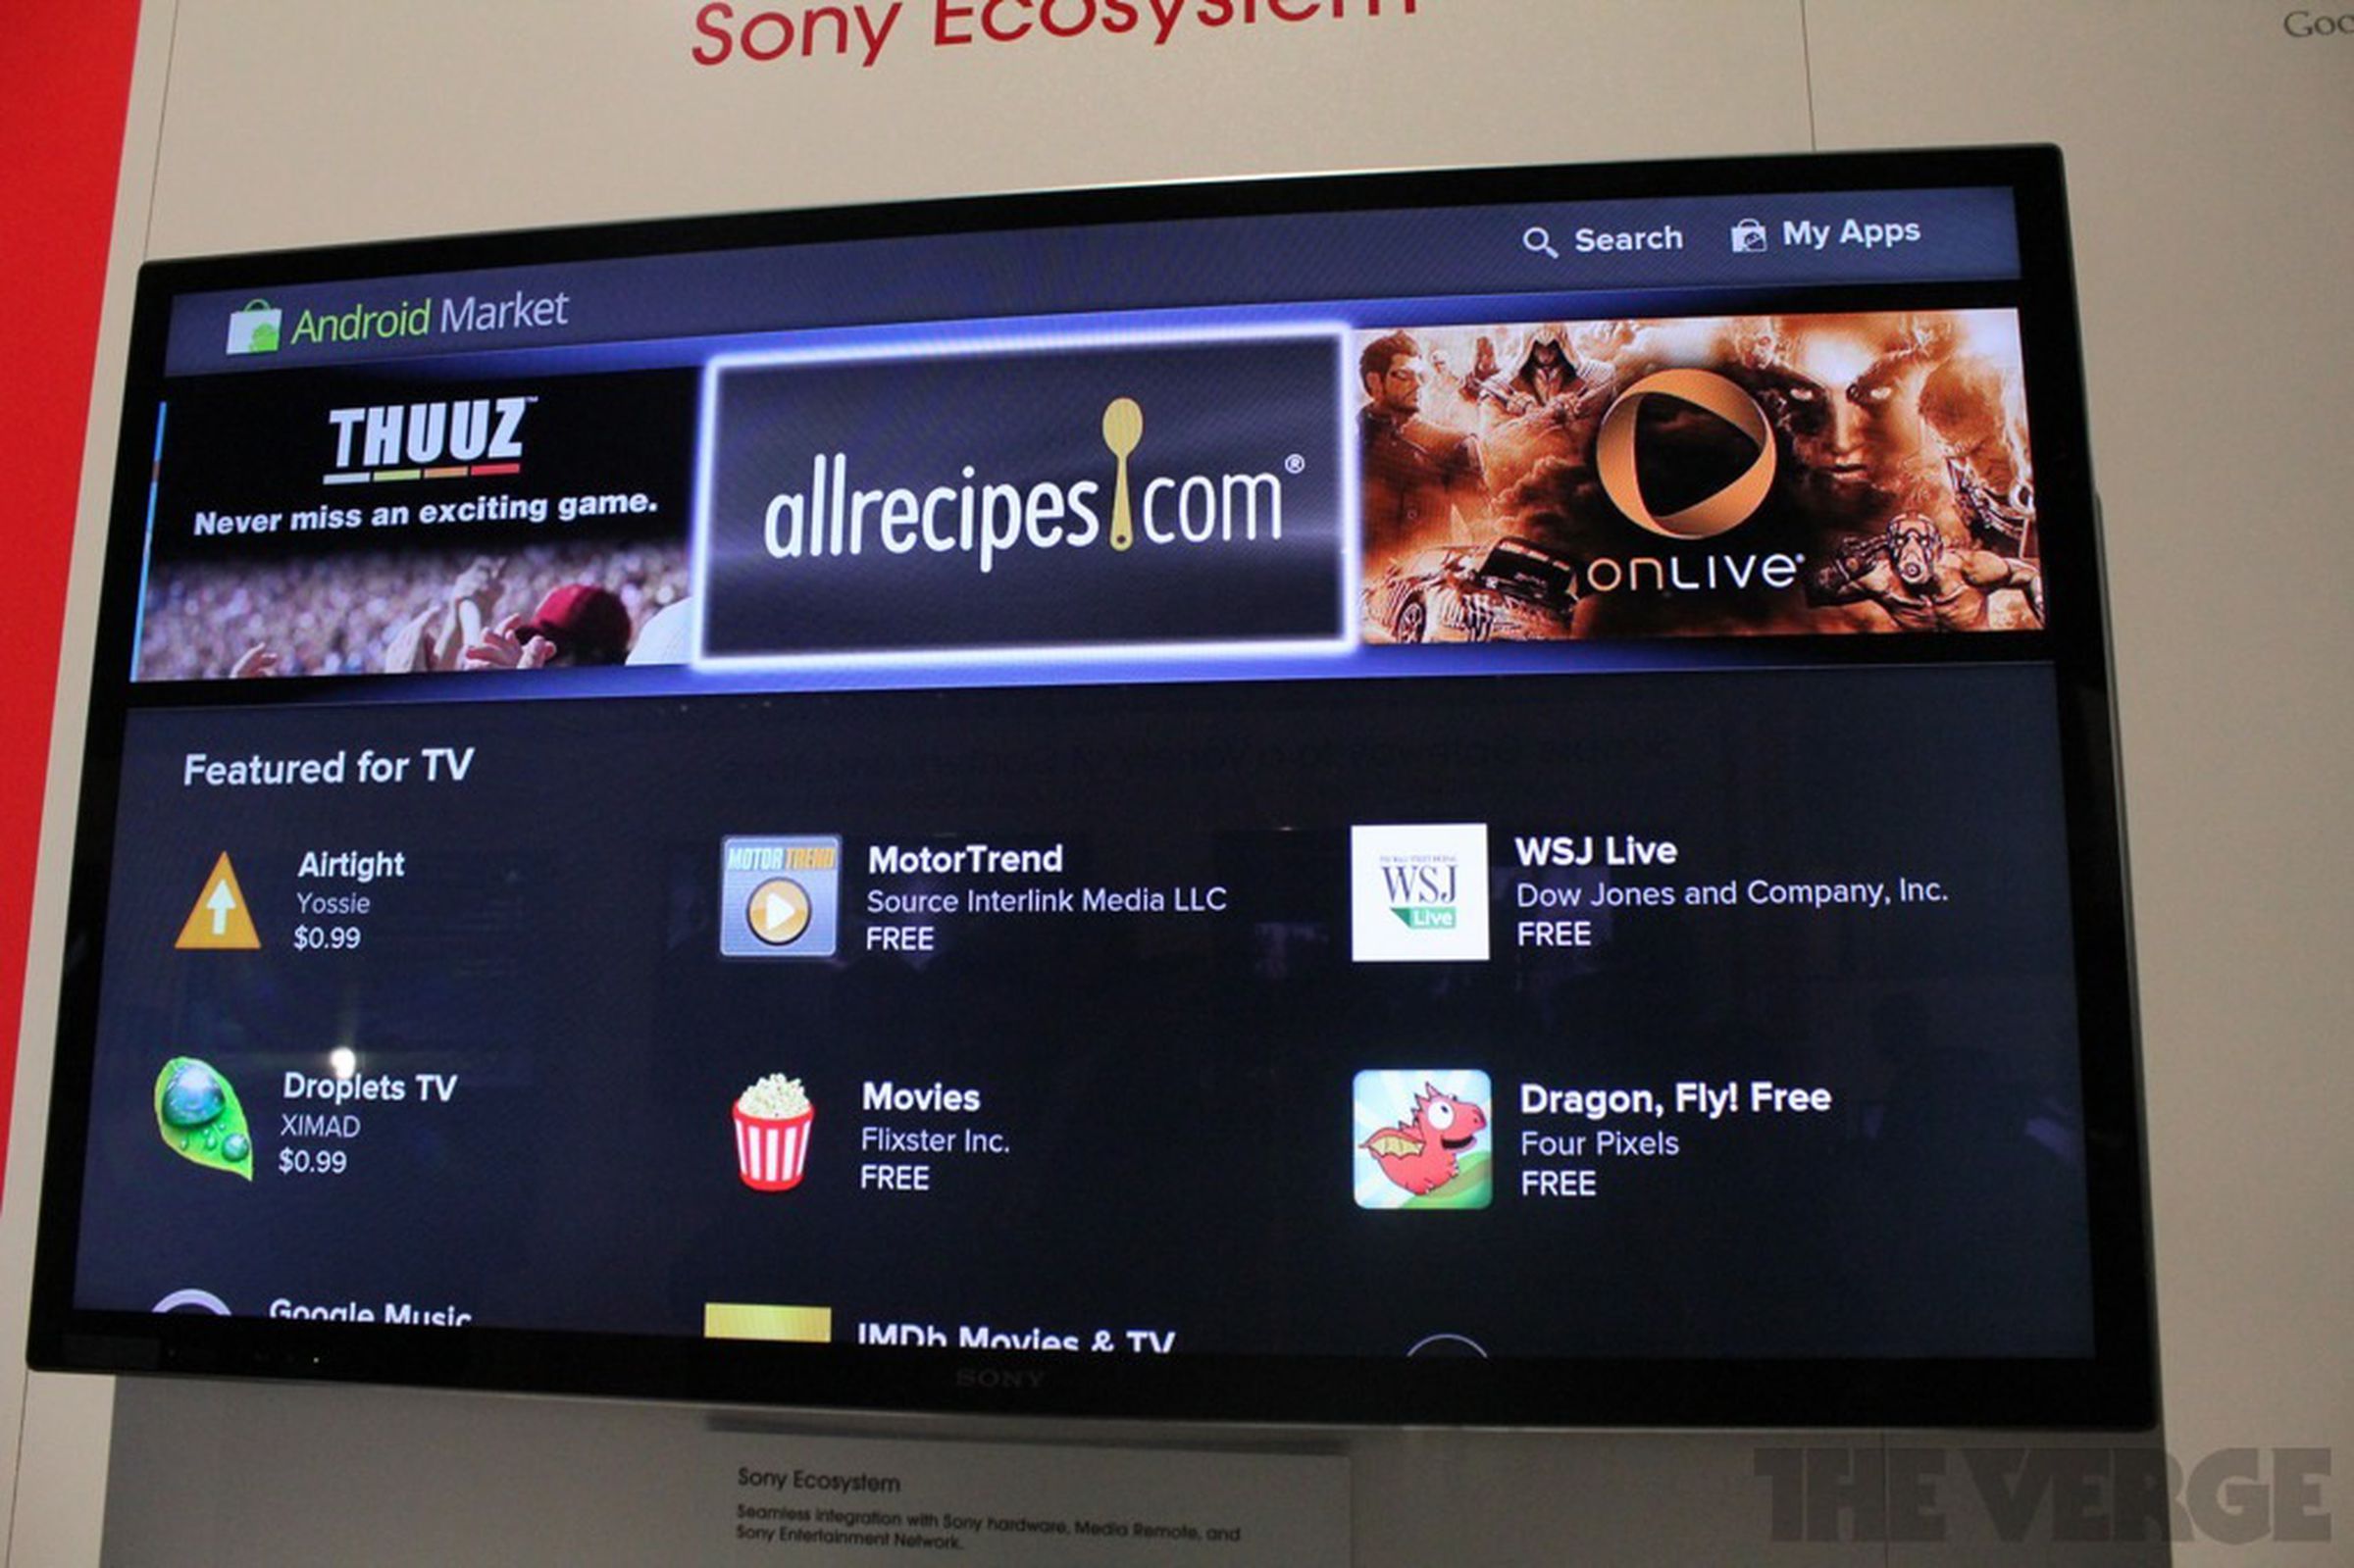 Sony Google TV 2.0 user interface hands-on pictures